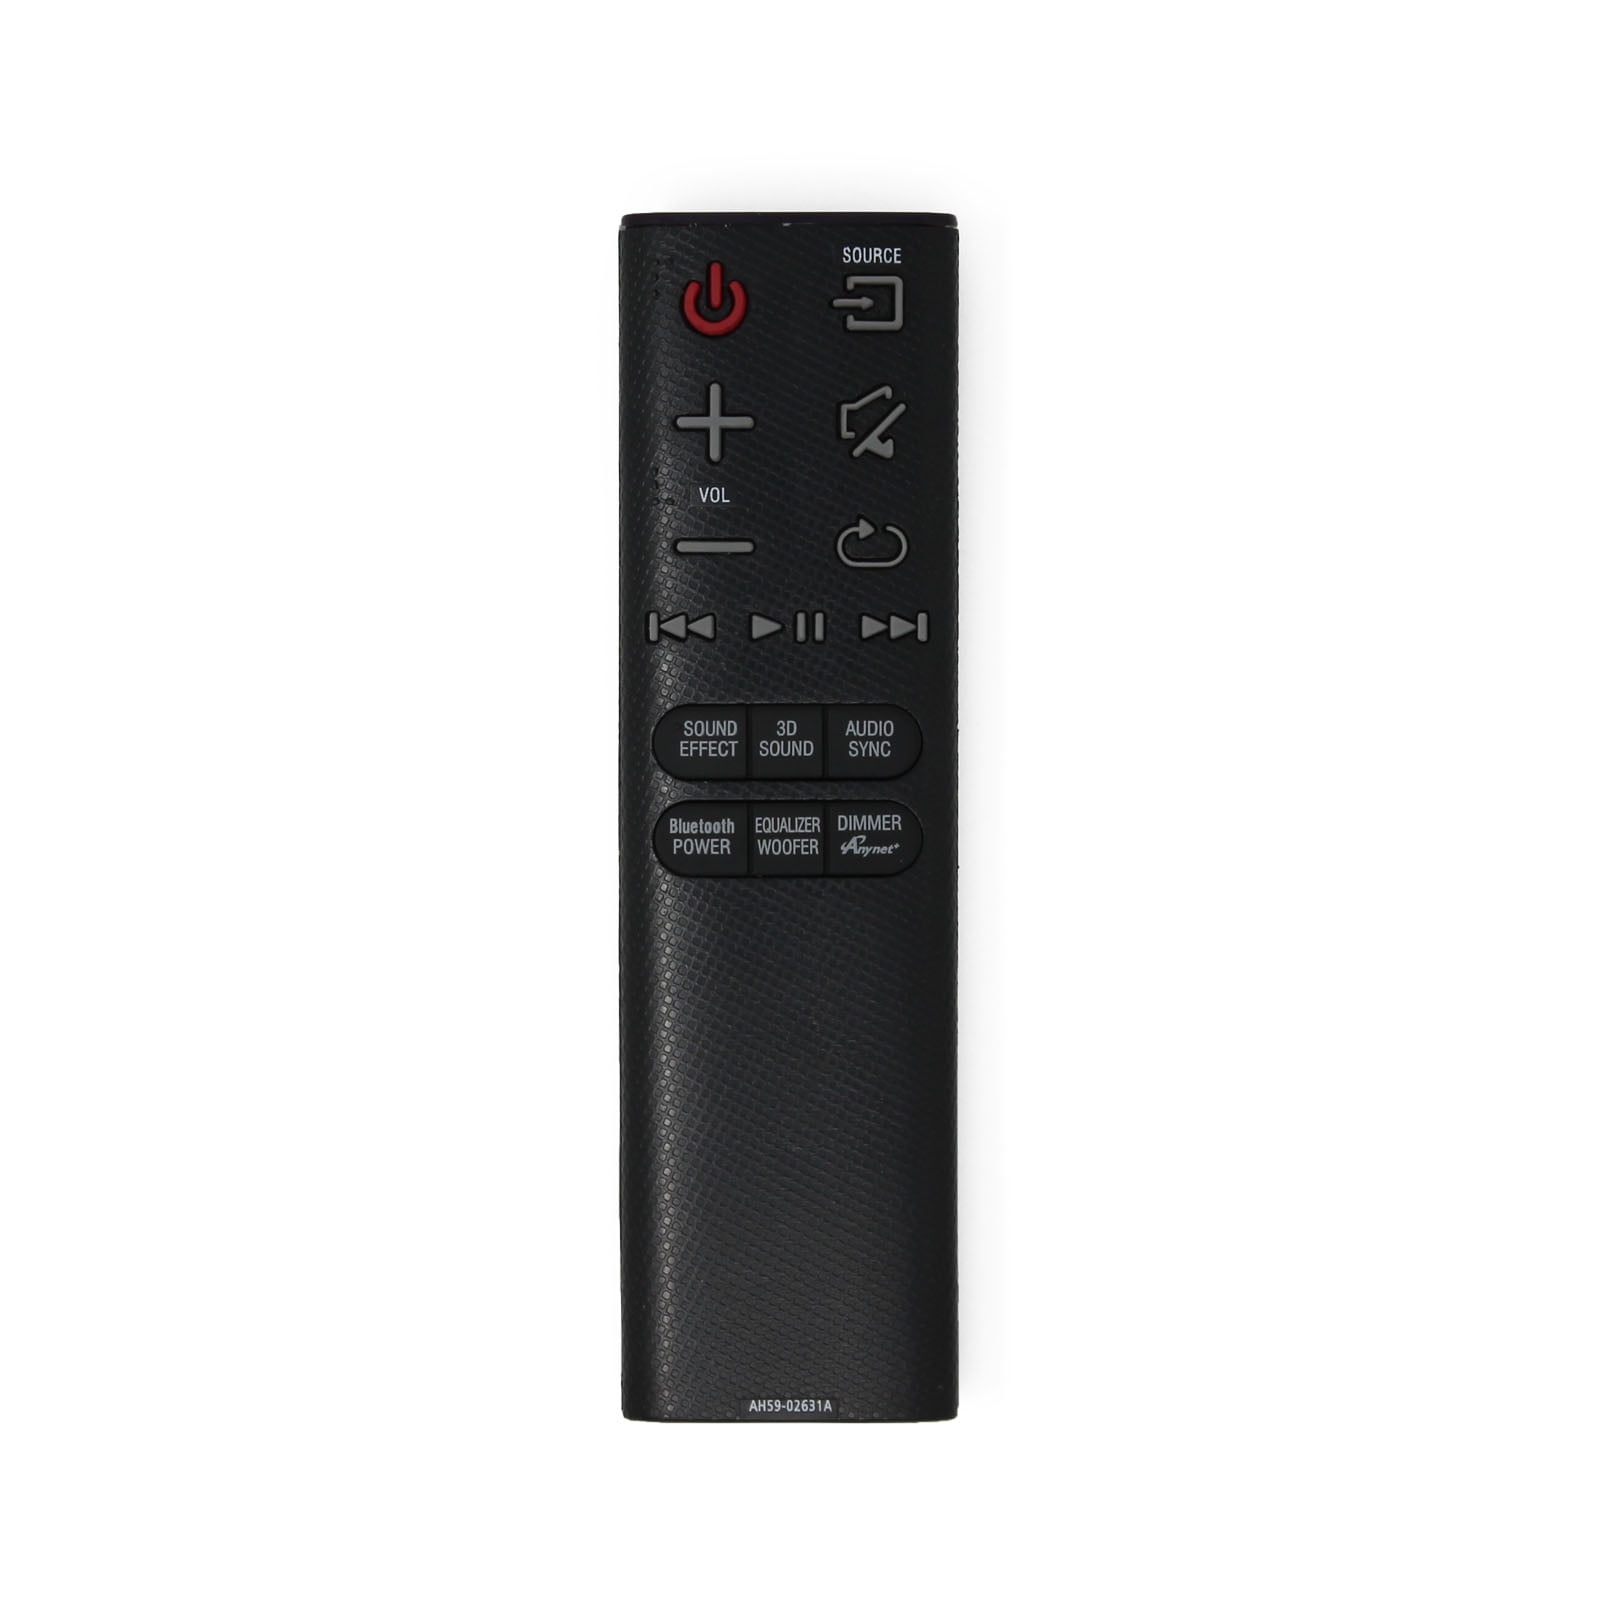 Replacement Samsung AH59-02631A Sound bar Remote Control for Samsung